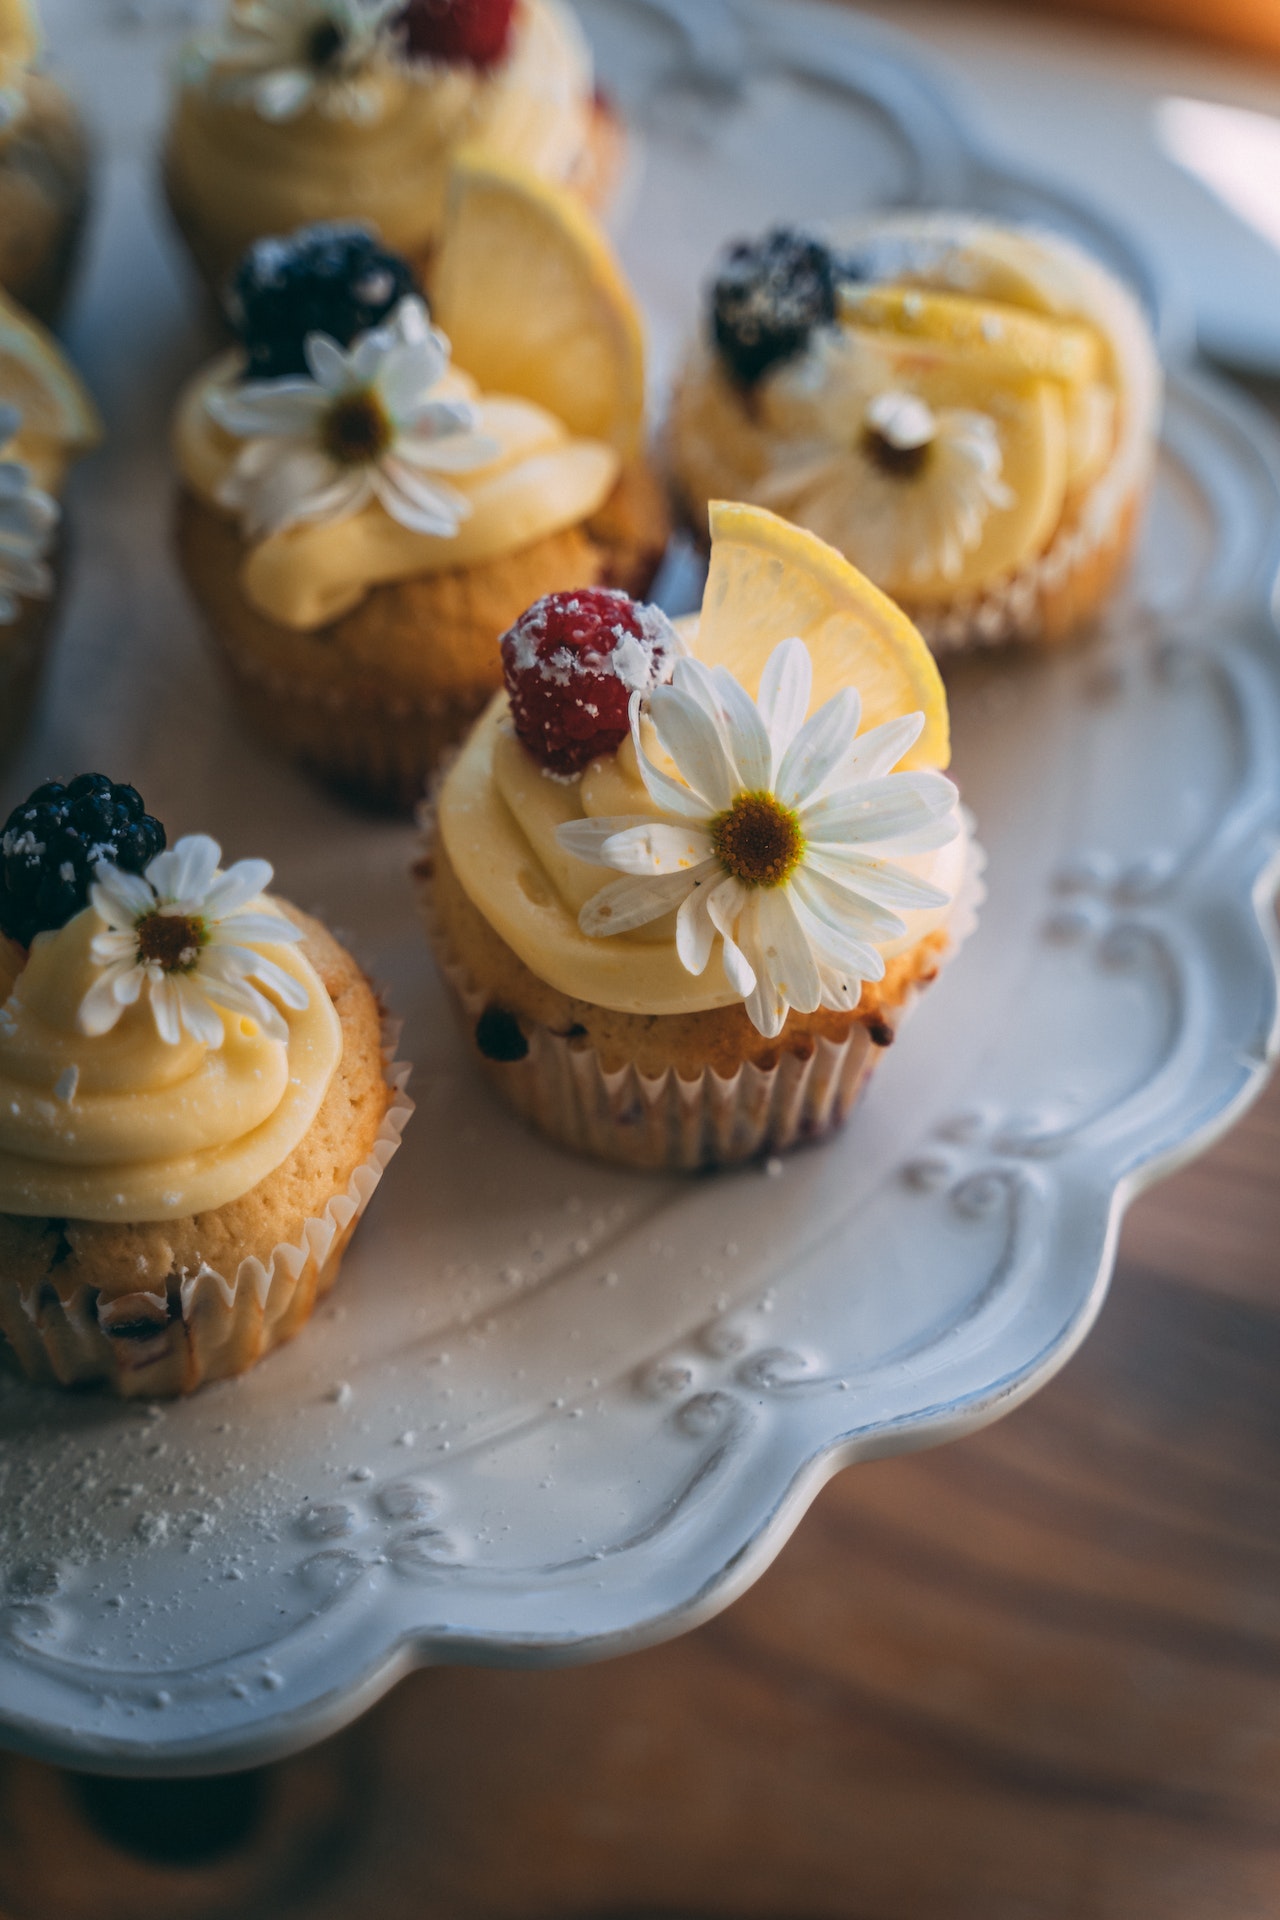 Photo by Taryn Elliott: https://www.pexels.com/photo/brown-cupcakes-with-white-icing-on-white-ceramic-plate-4099128/